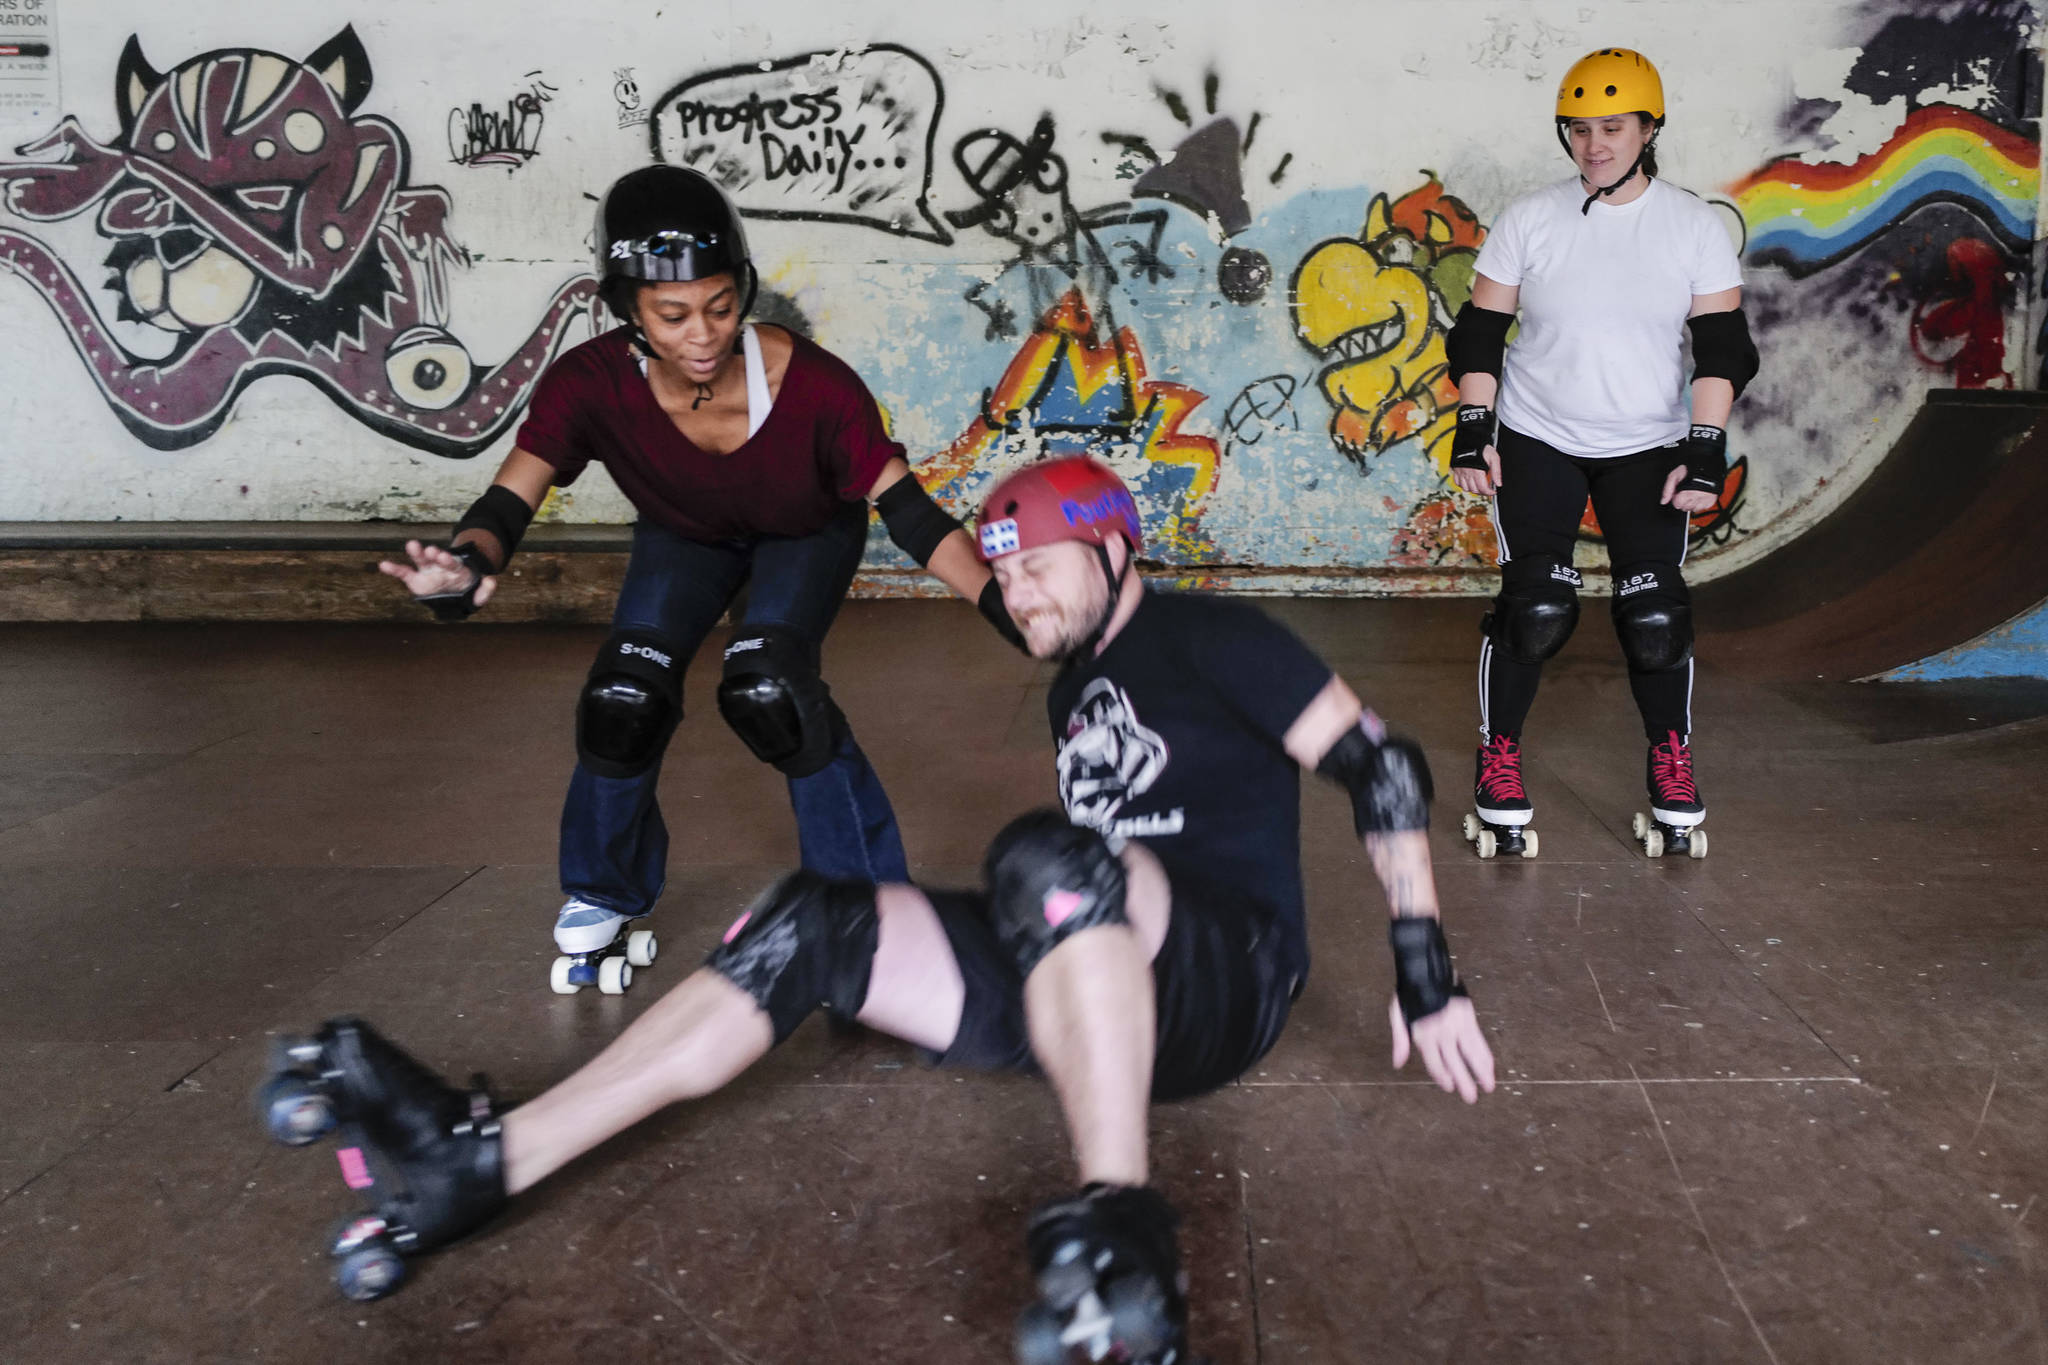 Empire reporter Michael S. Lockett takes a fall while being taught to rollerskate by Jennifer Gross, left, and Shabadrang Khalsa, at the Pipeline Skate Park on Friday, Oct. 11, 2019. (Michael Penn | Juneau Empire)